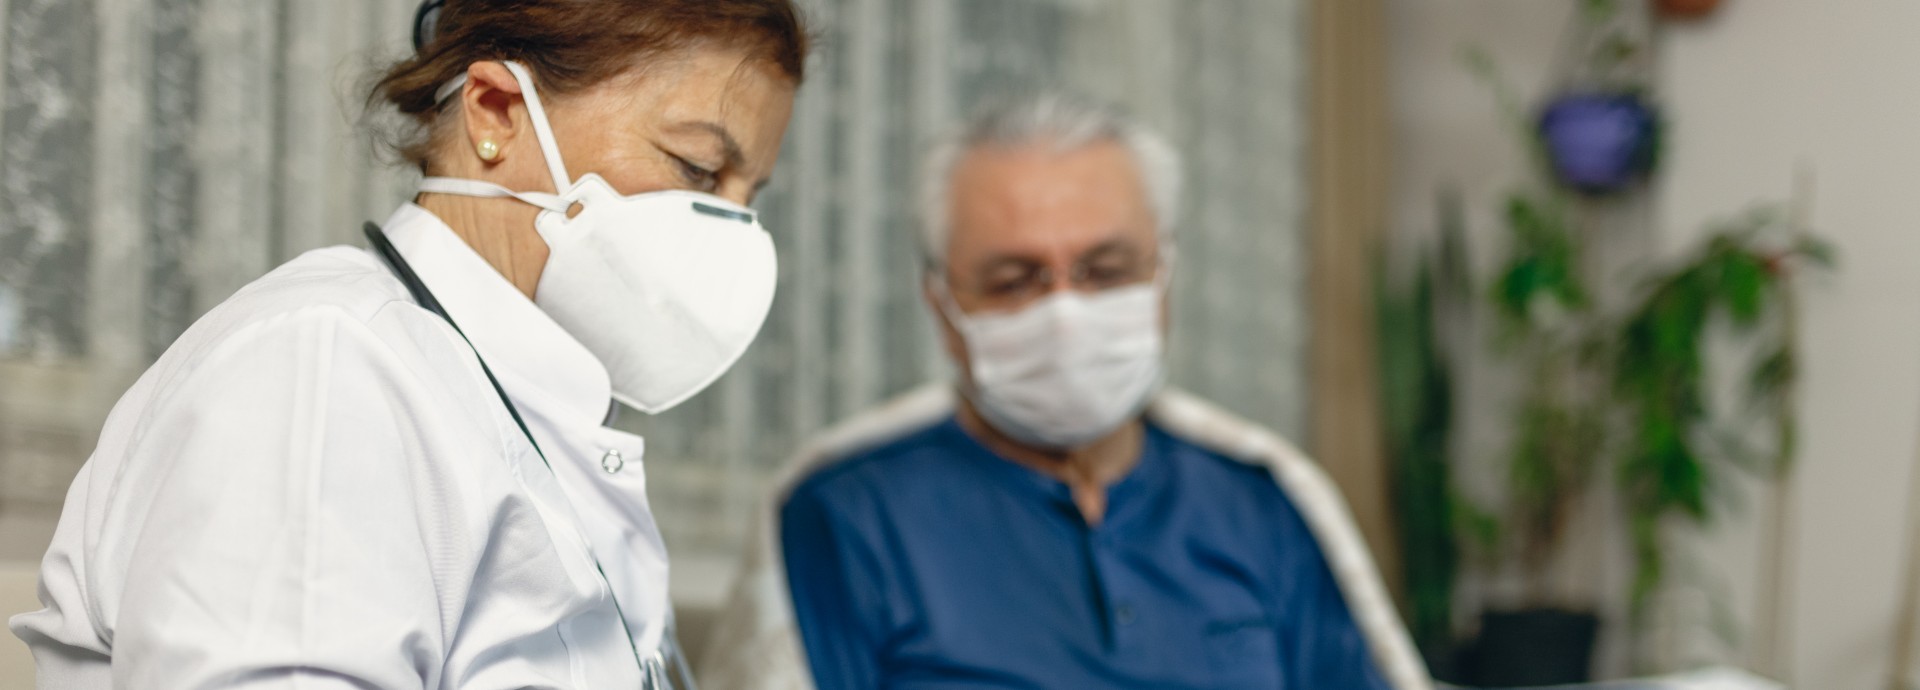 Doctor and patient in masks